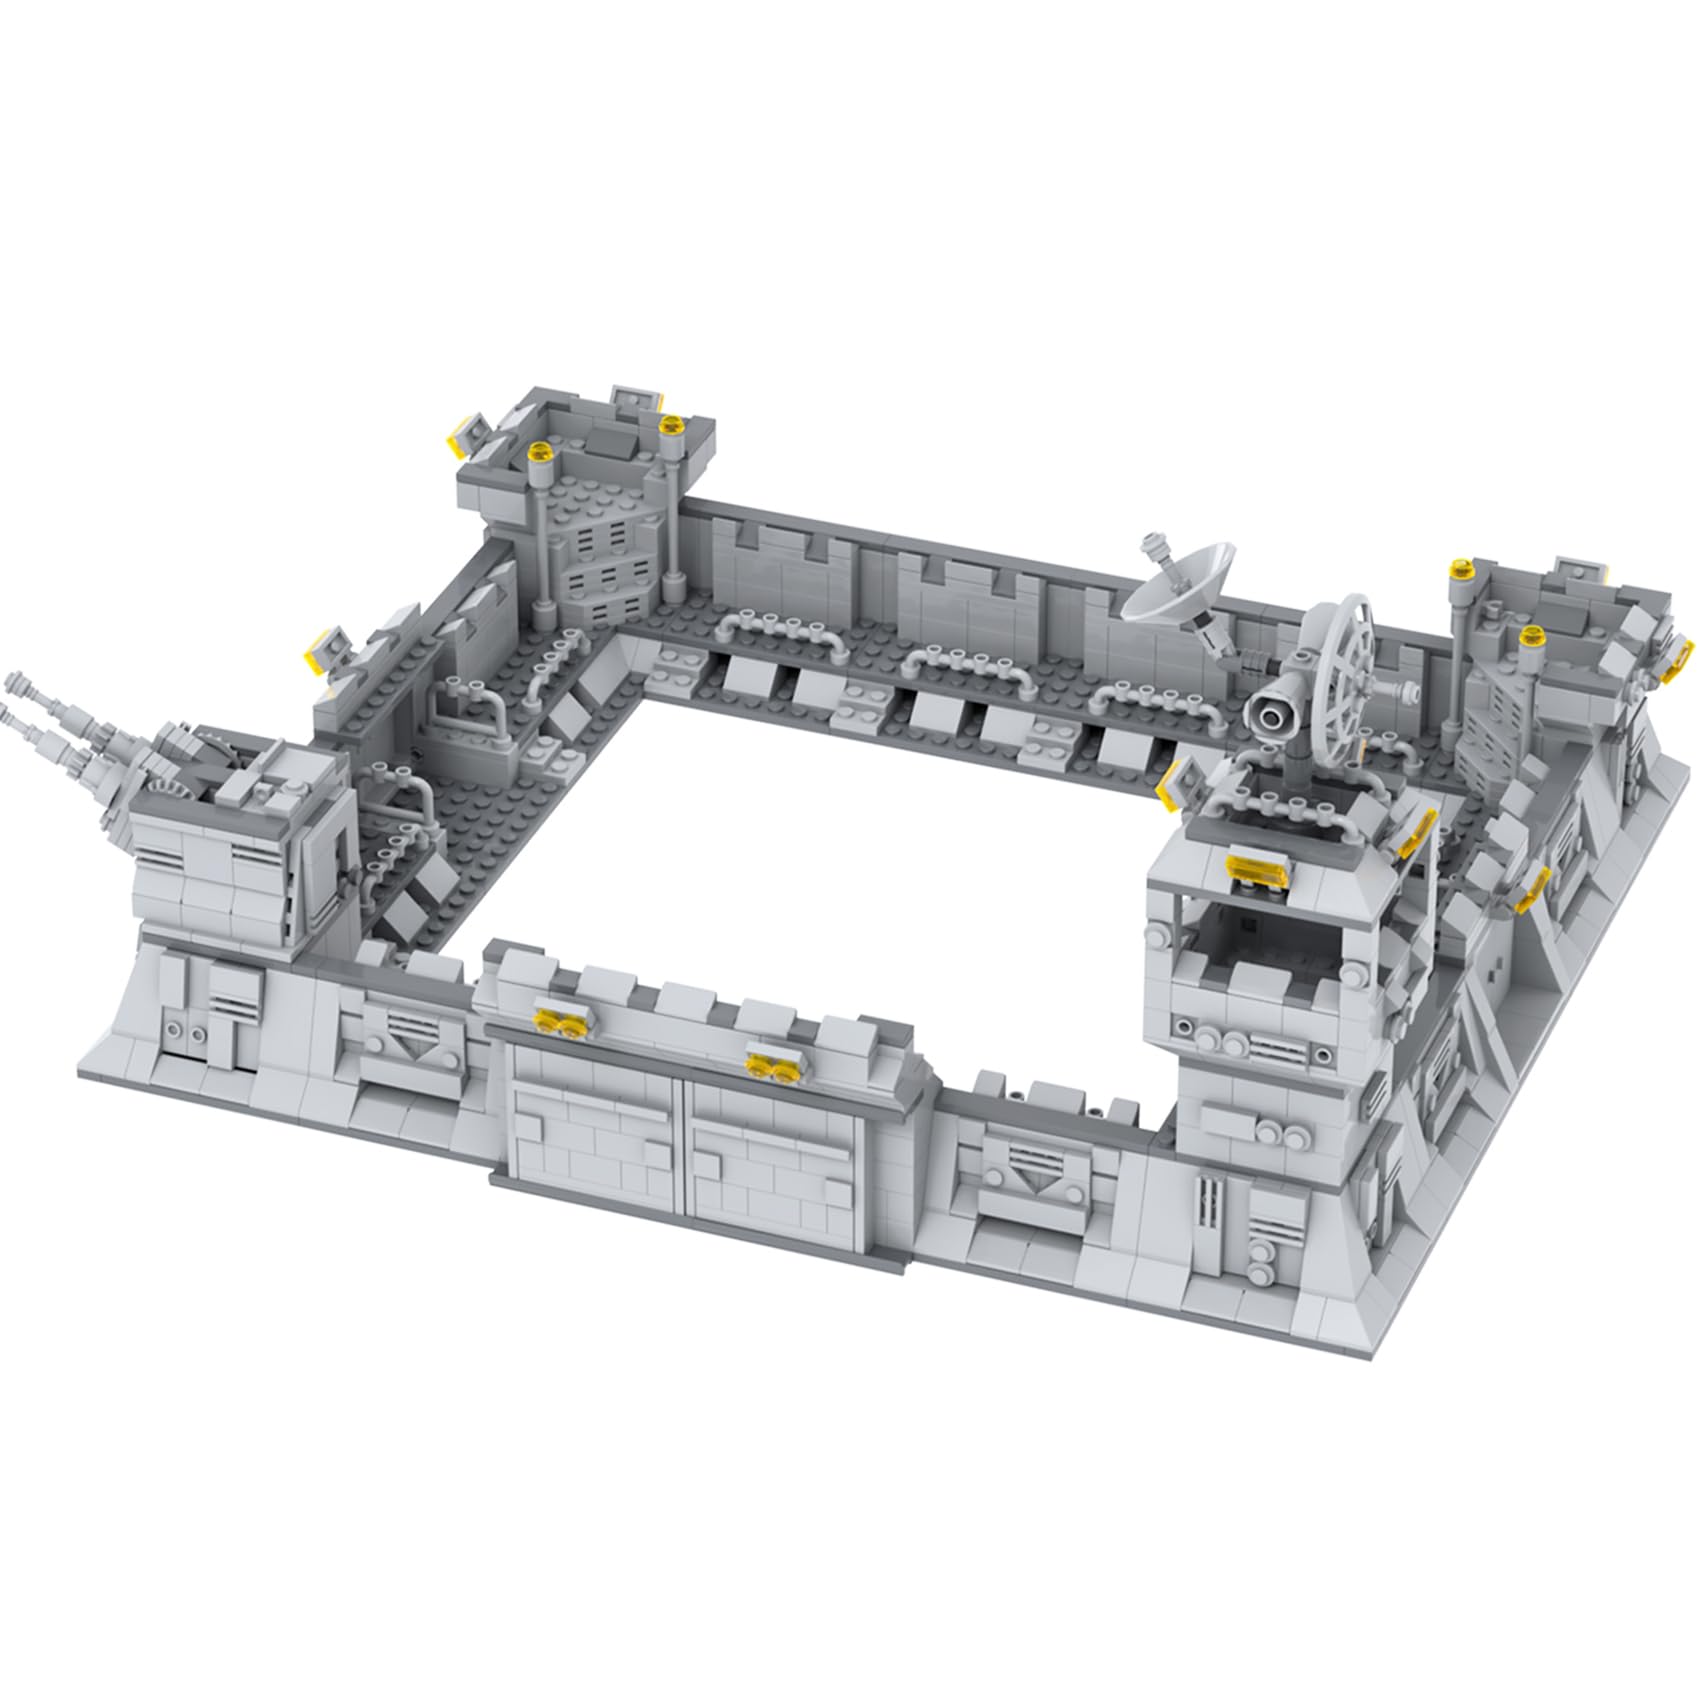 MOOXI Space War Large Military Base Building Block Set - 1721 Piece Plastic Construction Toy Set for Kids. 送料無料